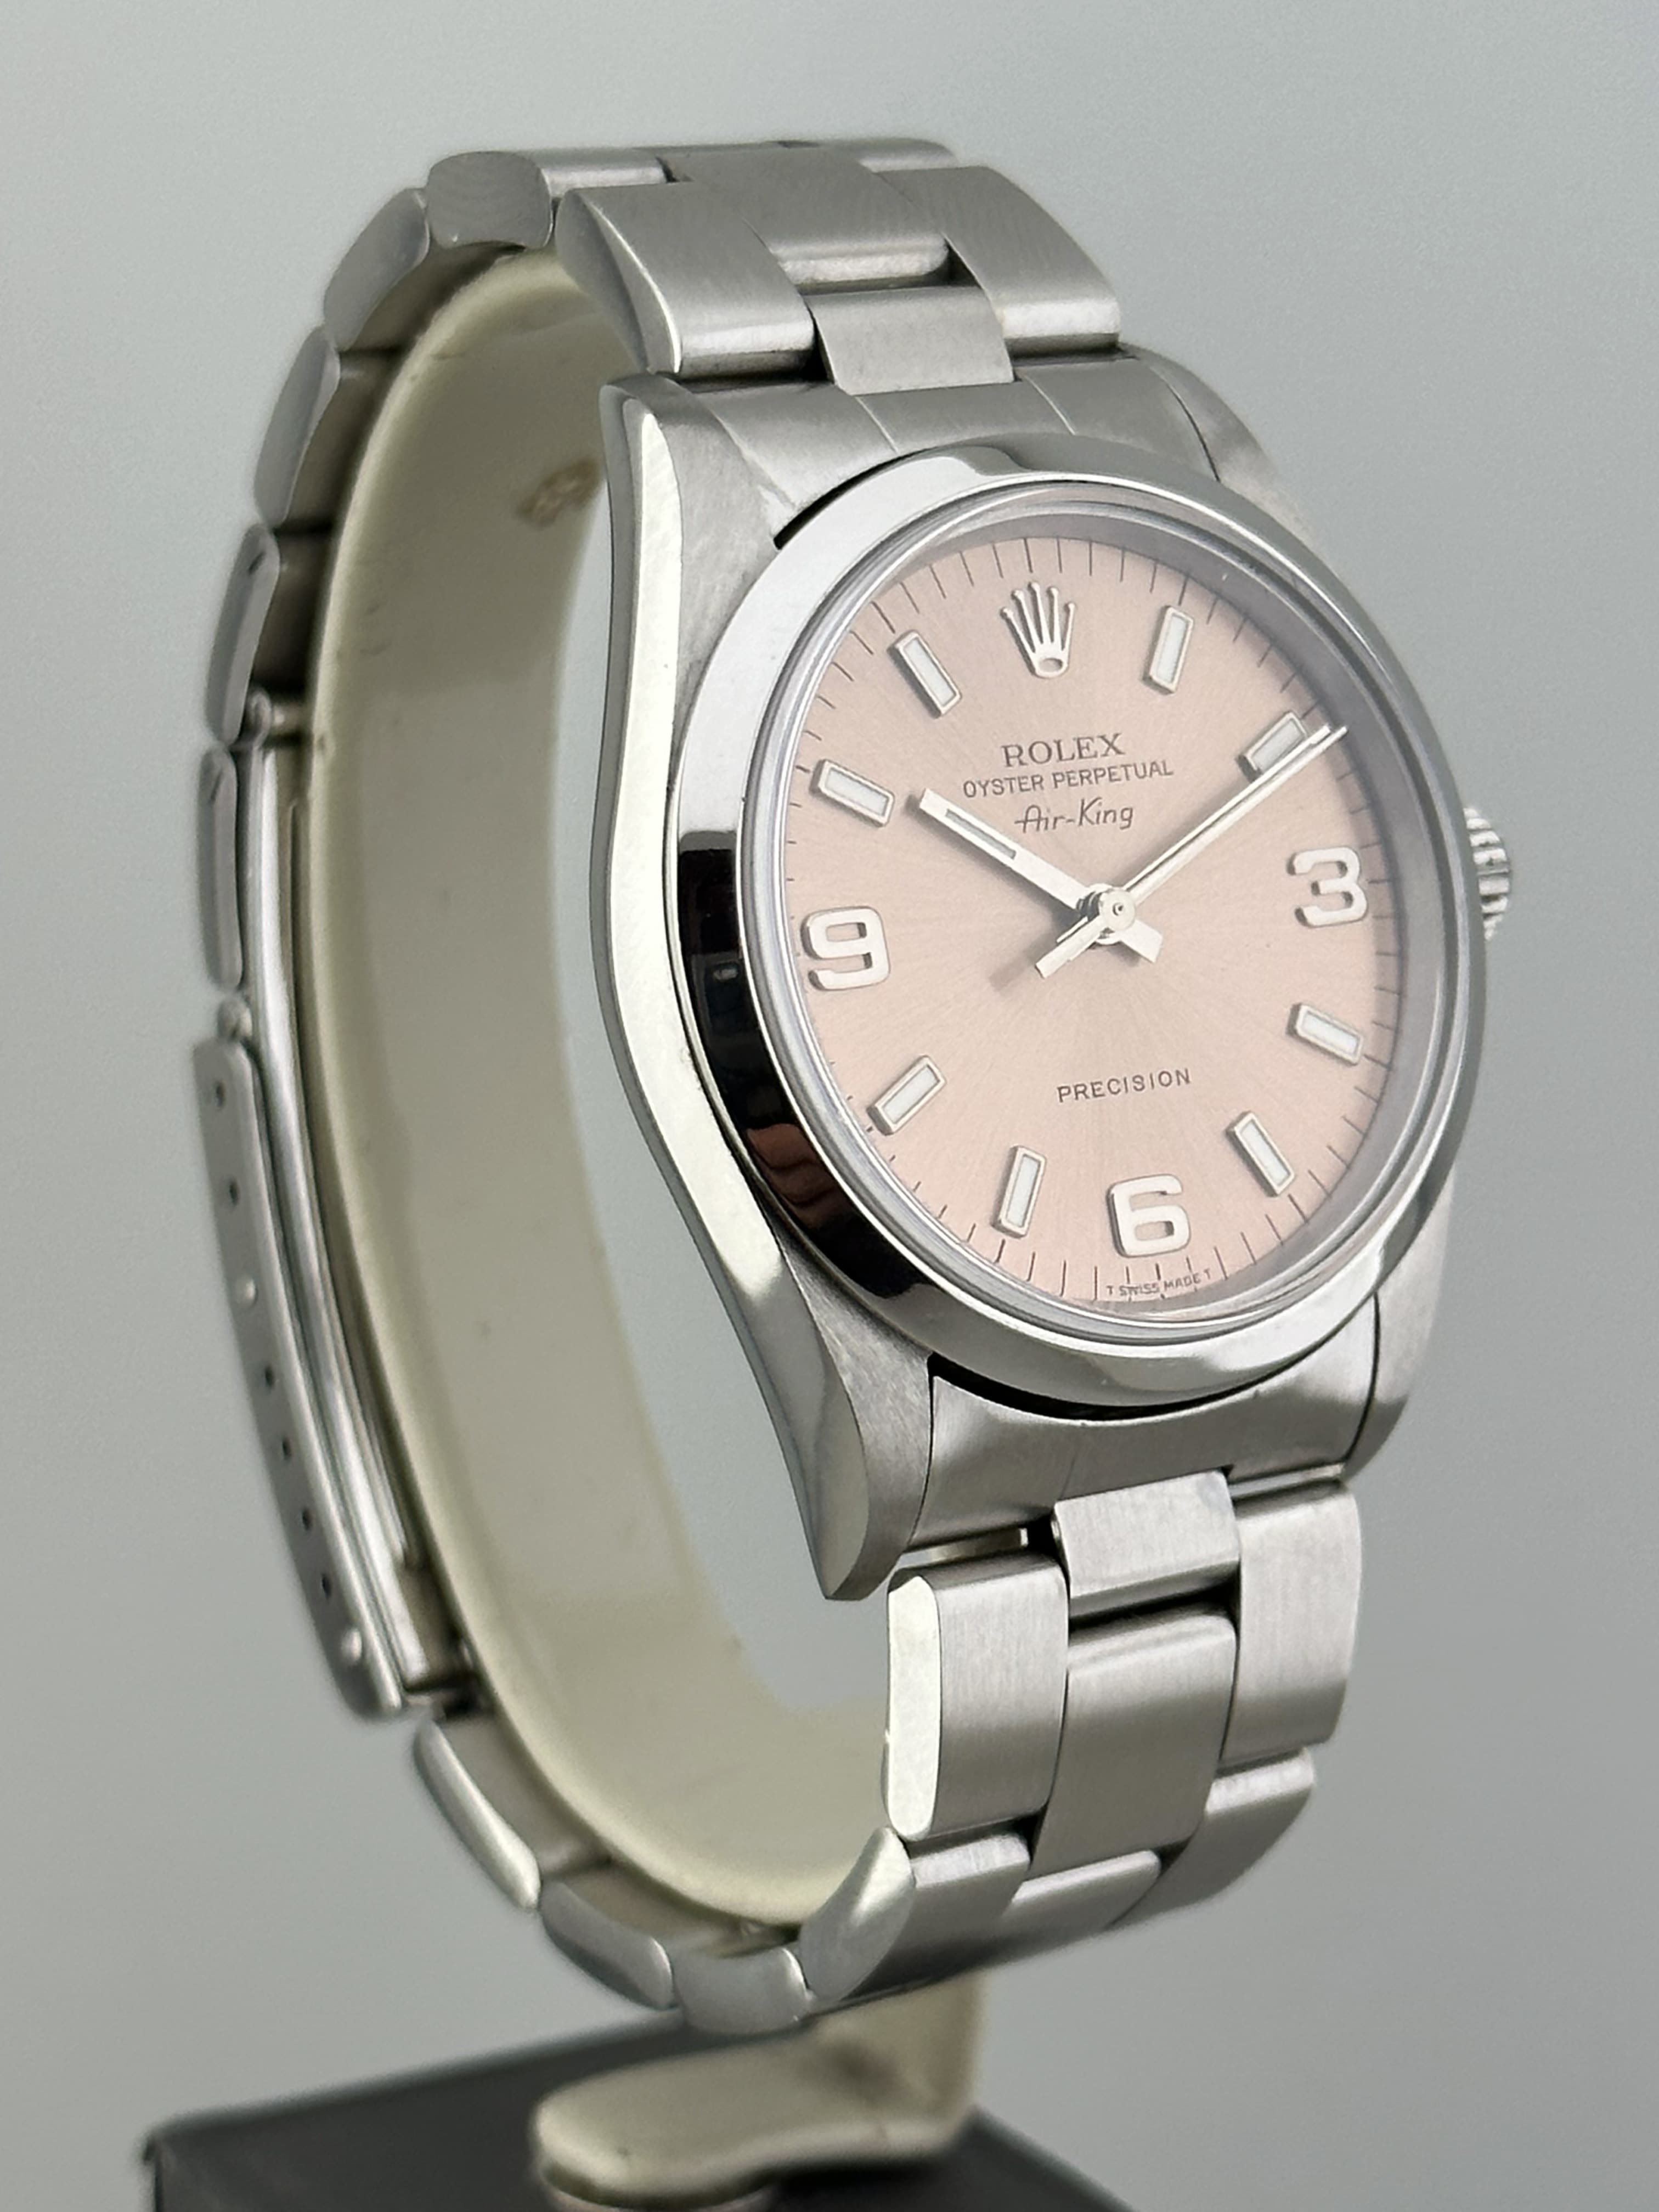 Rolex Air king ref: 14000 | Foto laterale